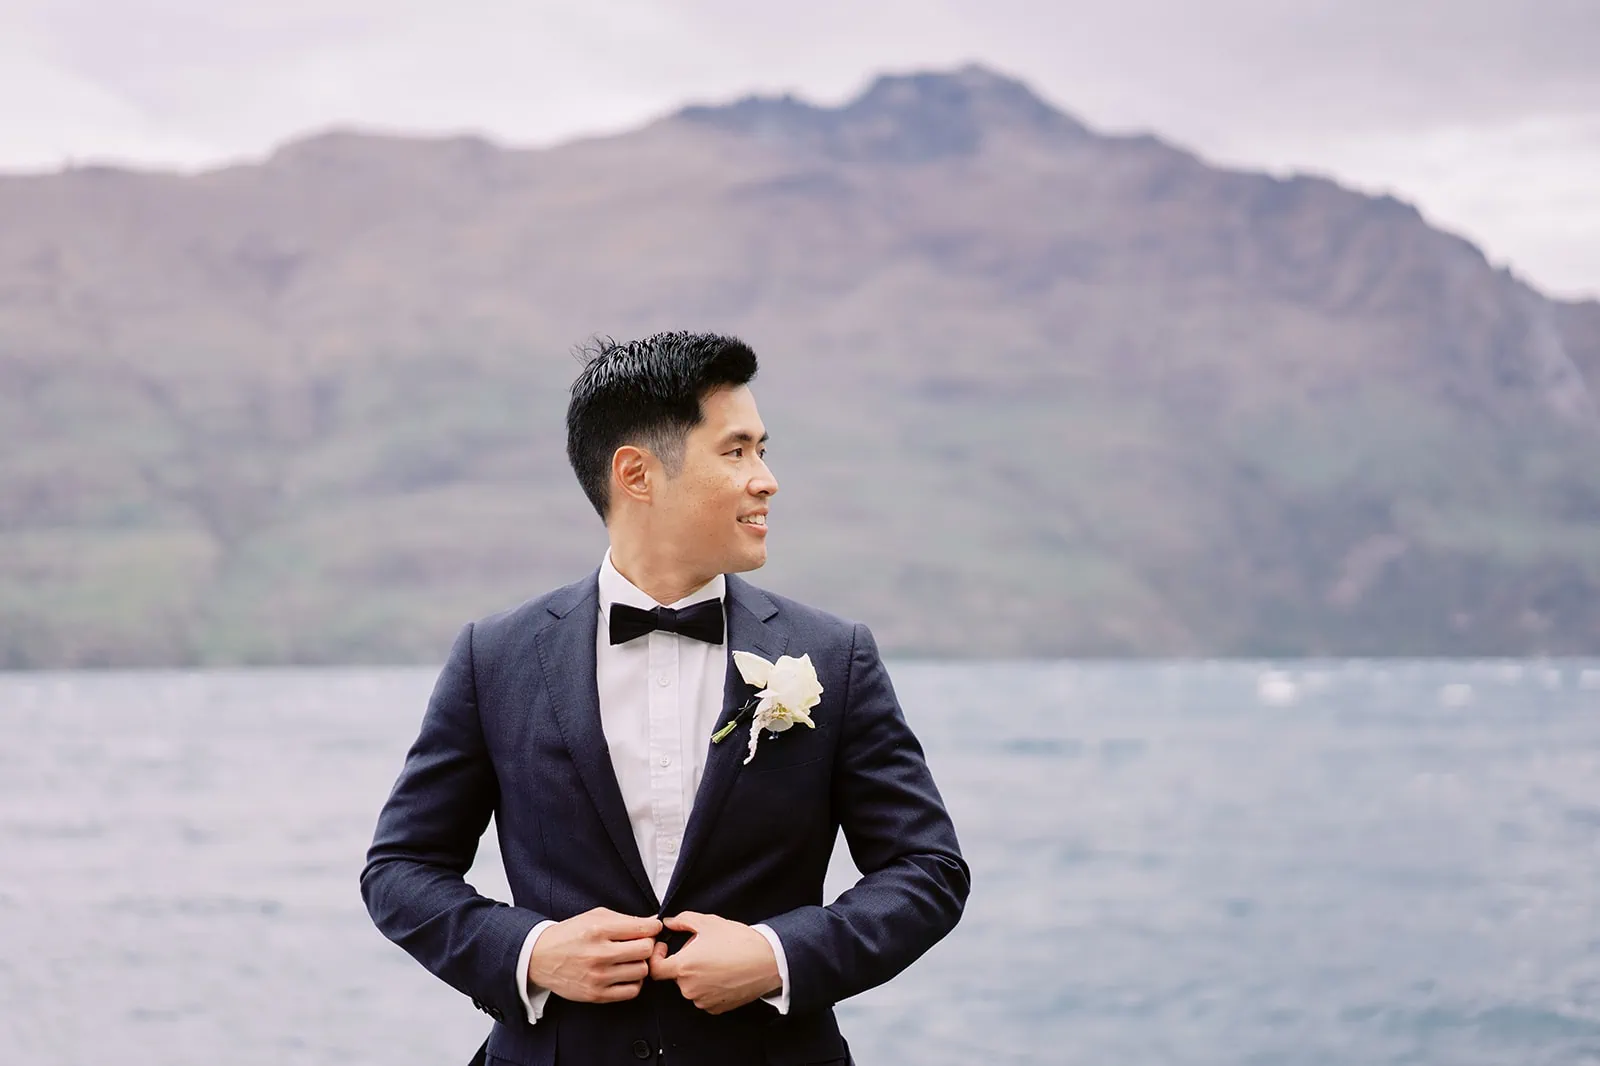 Queenstown Elopement Heli Wedding Photographer クイーンズタウン結婚式 | A man in a suit and bow tie looks dapper for his pre-wedding photoshoot.